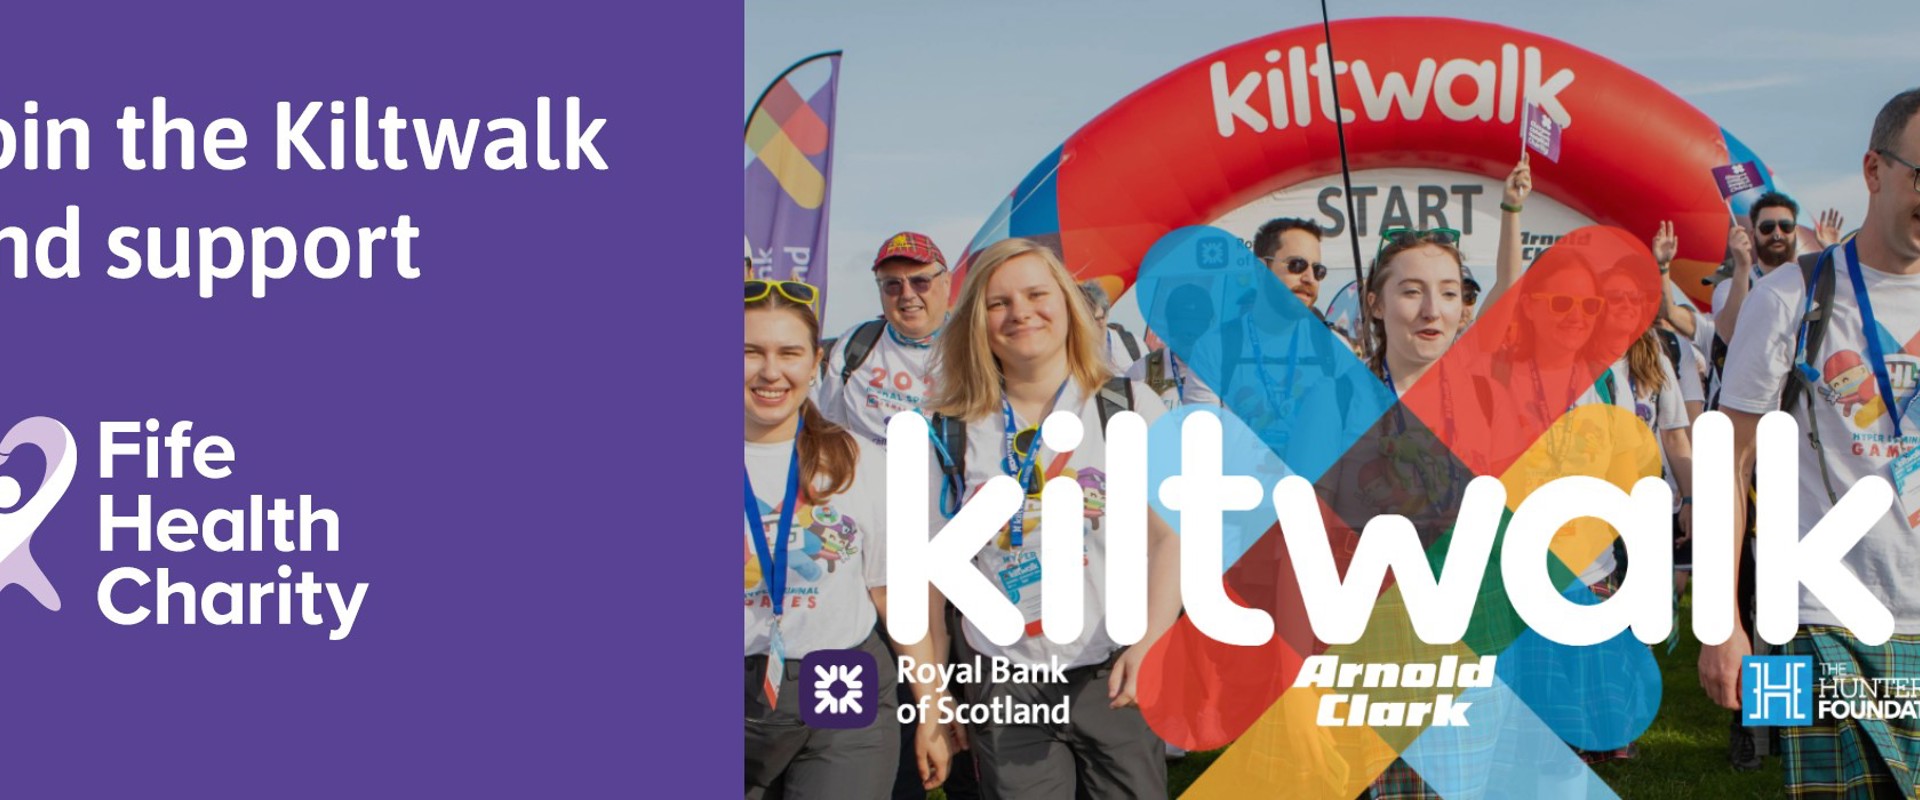 Join the Kiltwalk and support Fife Health Charity